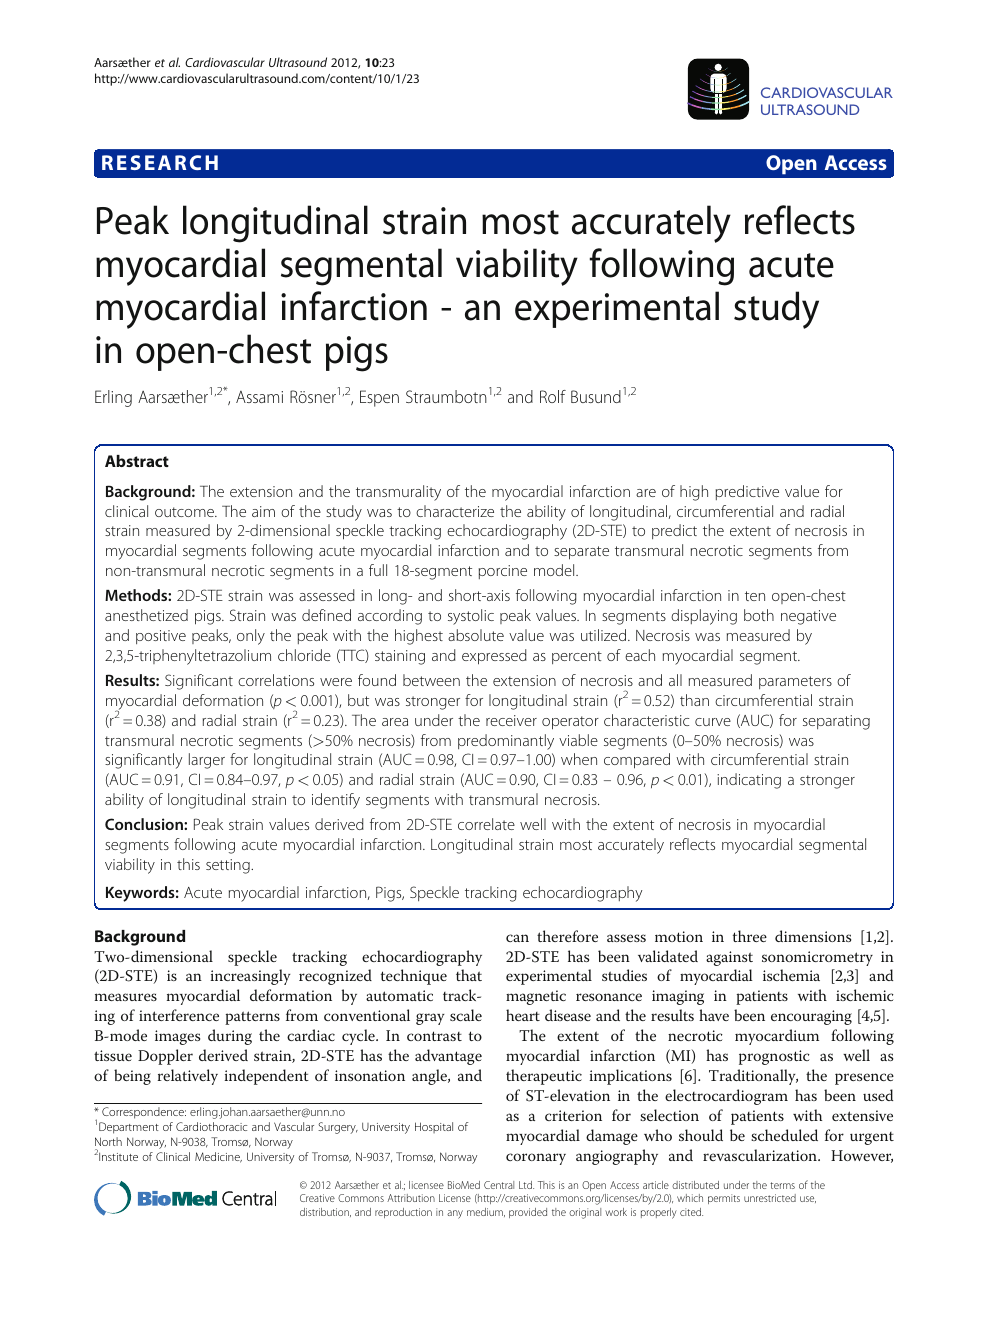 Longitudinal strain by two-dimensional speckle tracking to assess